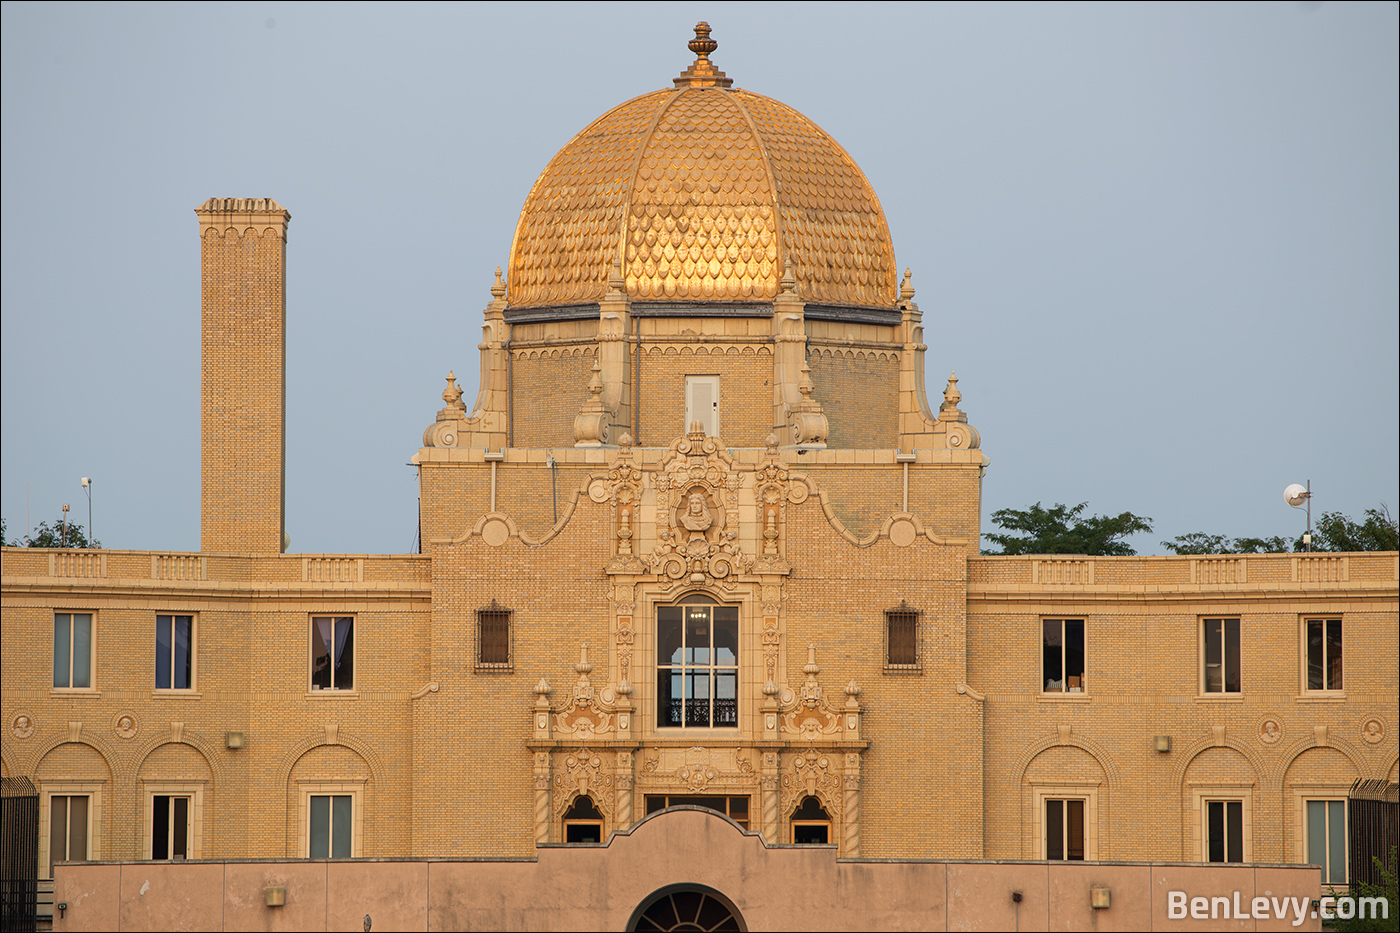 The Gold Dome on the Garfield Park Fieldhouse